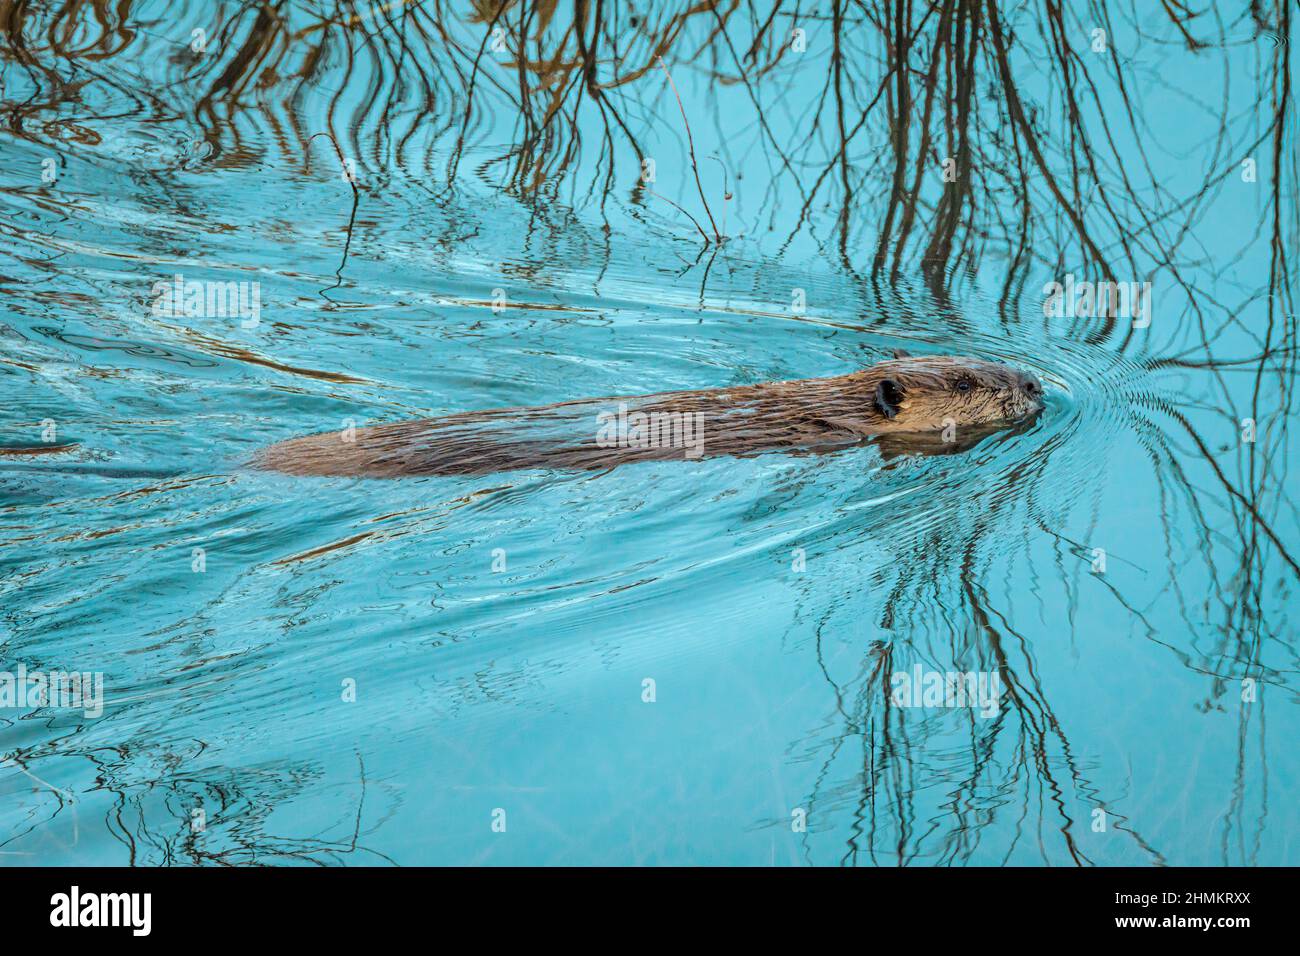 American Beaver (Castor canadensis) swims in East Plum Creek with the reflection of willows in water. Castle Rock Colorado USA. Photo taken- January. Stock Photo